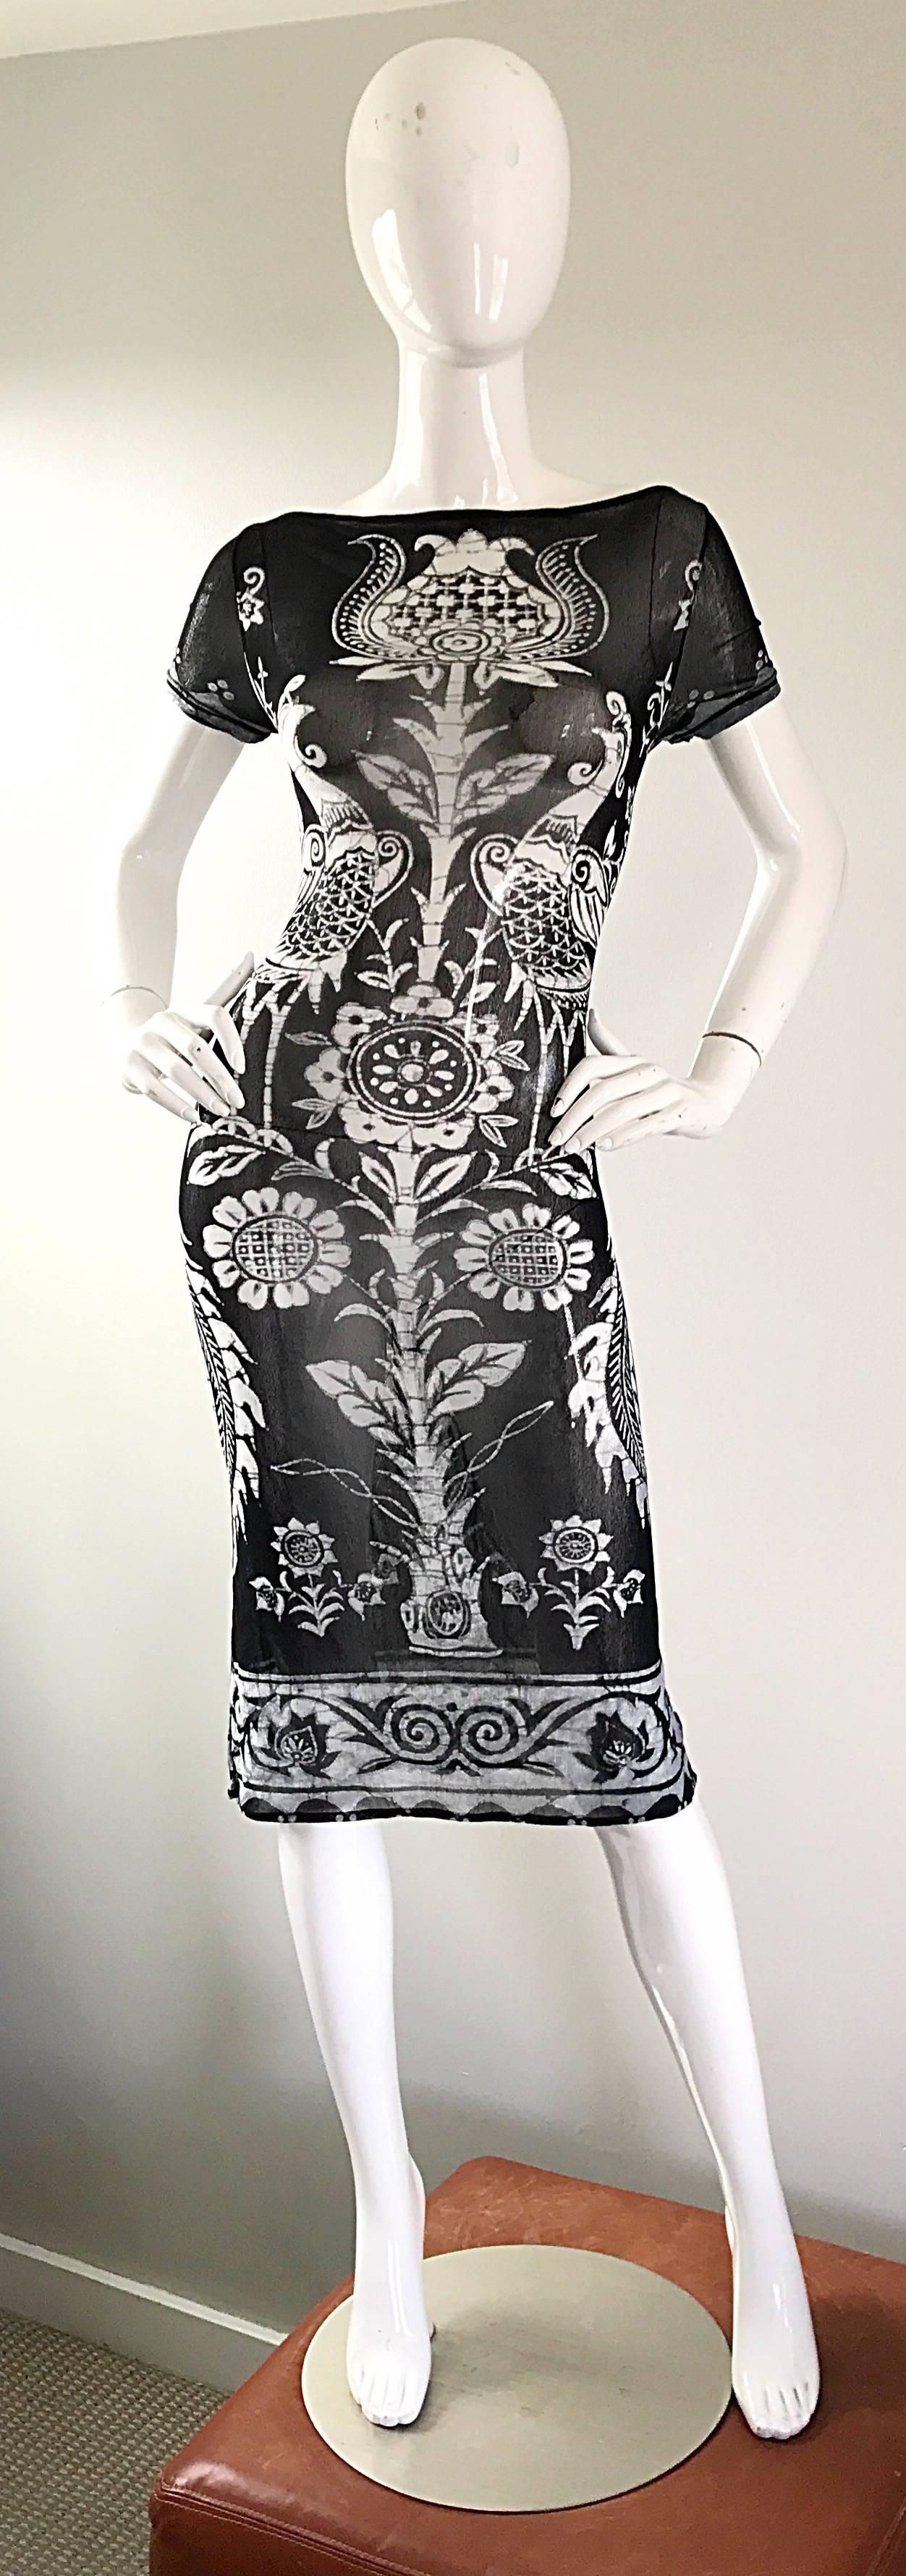 Rare 1990s VIVIENNE TAM black and white semi sheer Asian themed print dress! Features a body hugging net fabric that stretches to fit. Symmetrically printed birds and sunflowers throughout. Simply slips over the head. Great alone, or with a slip